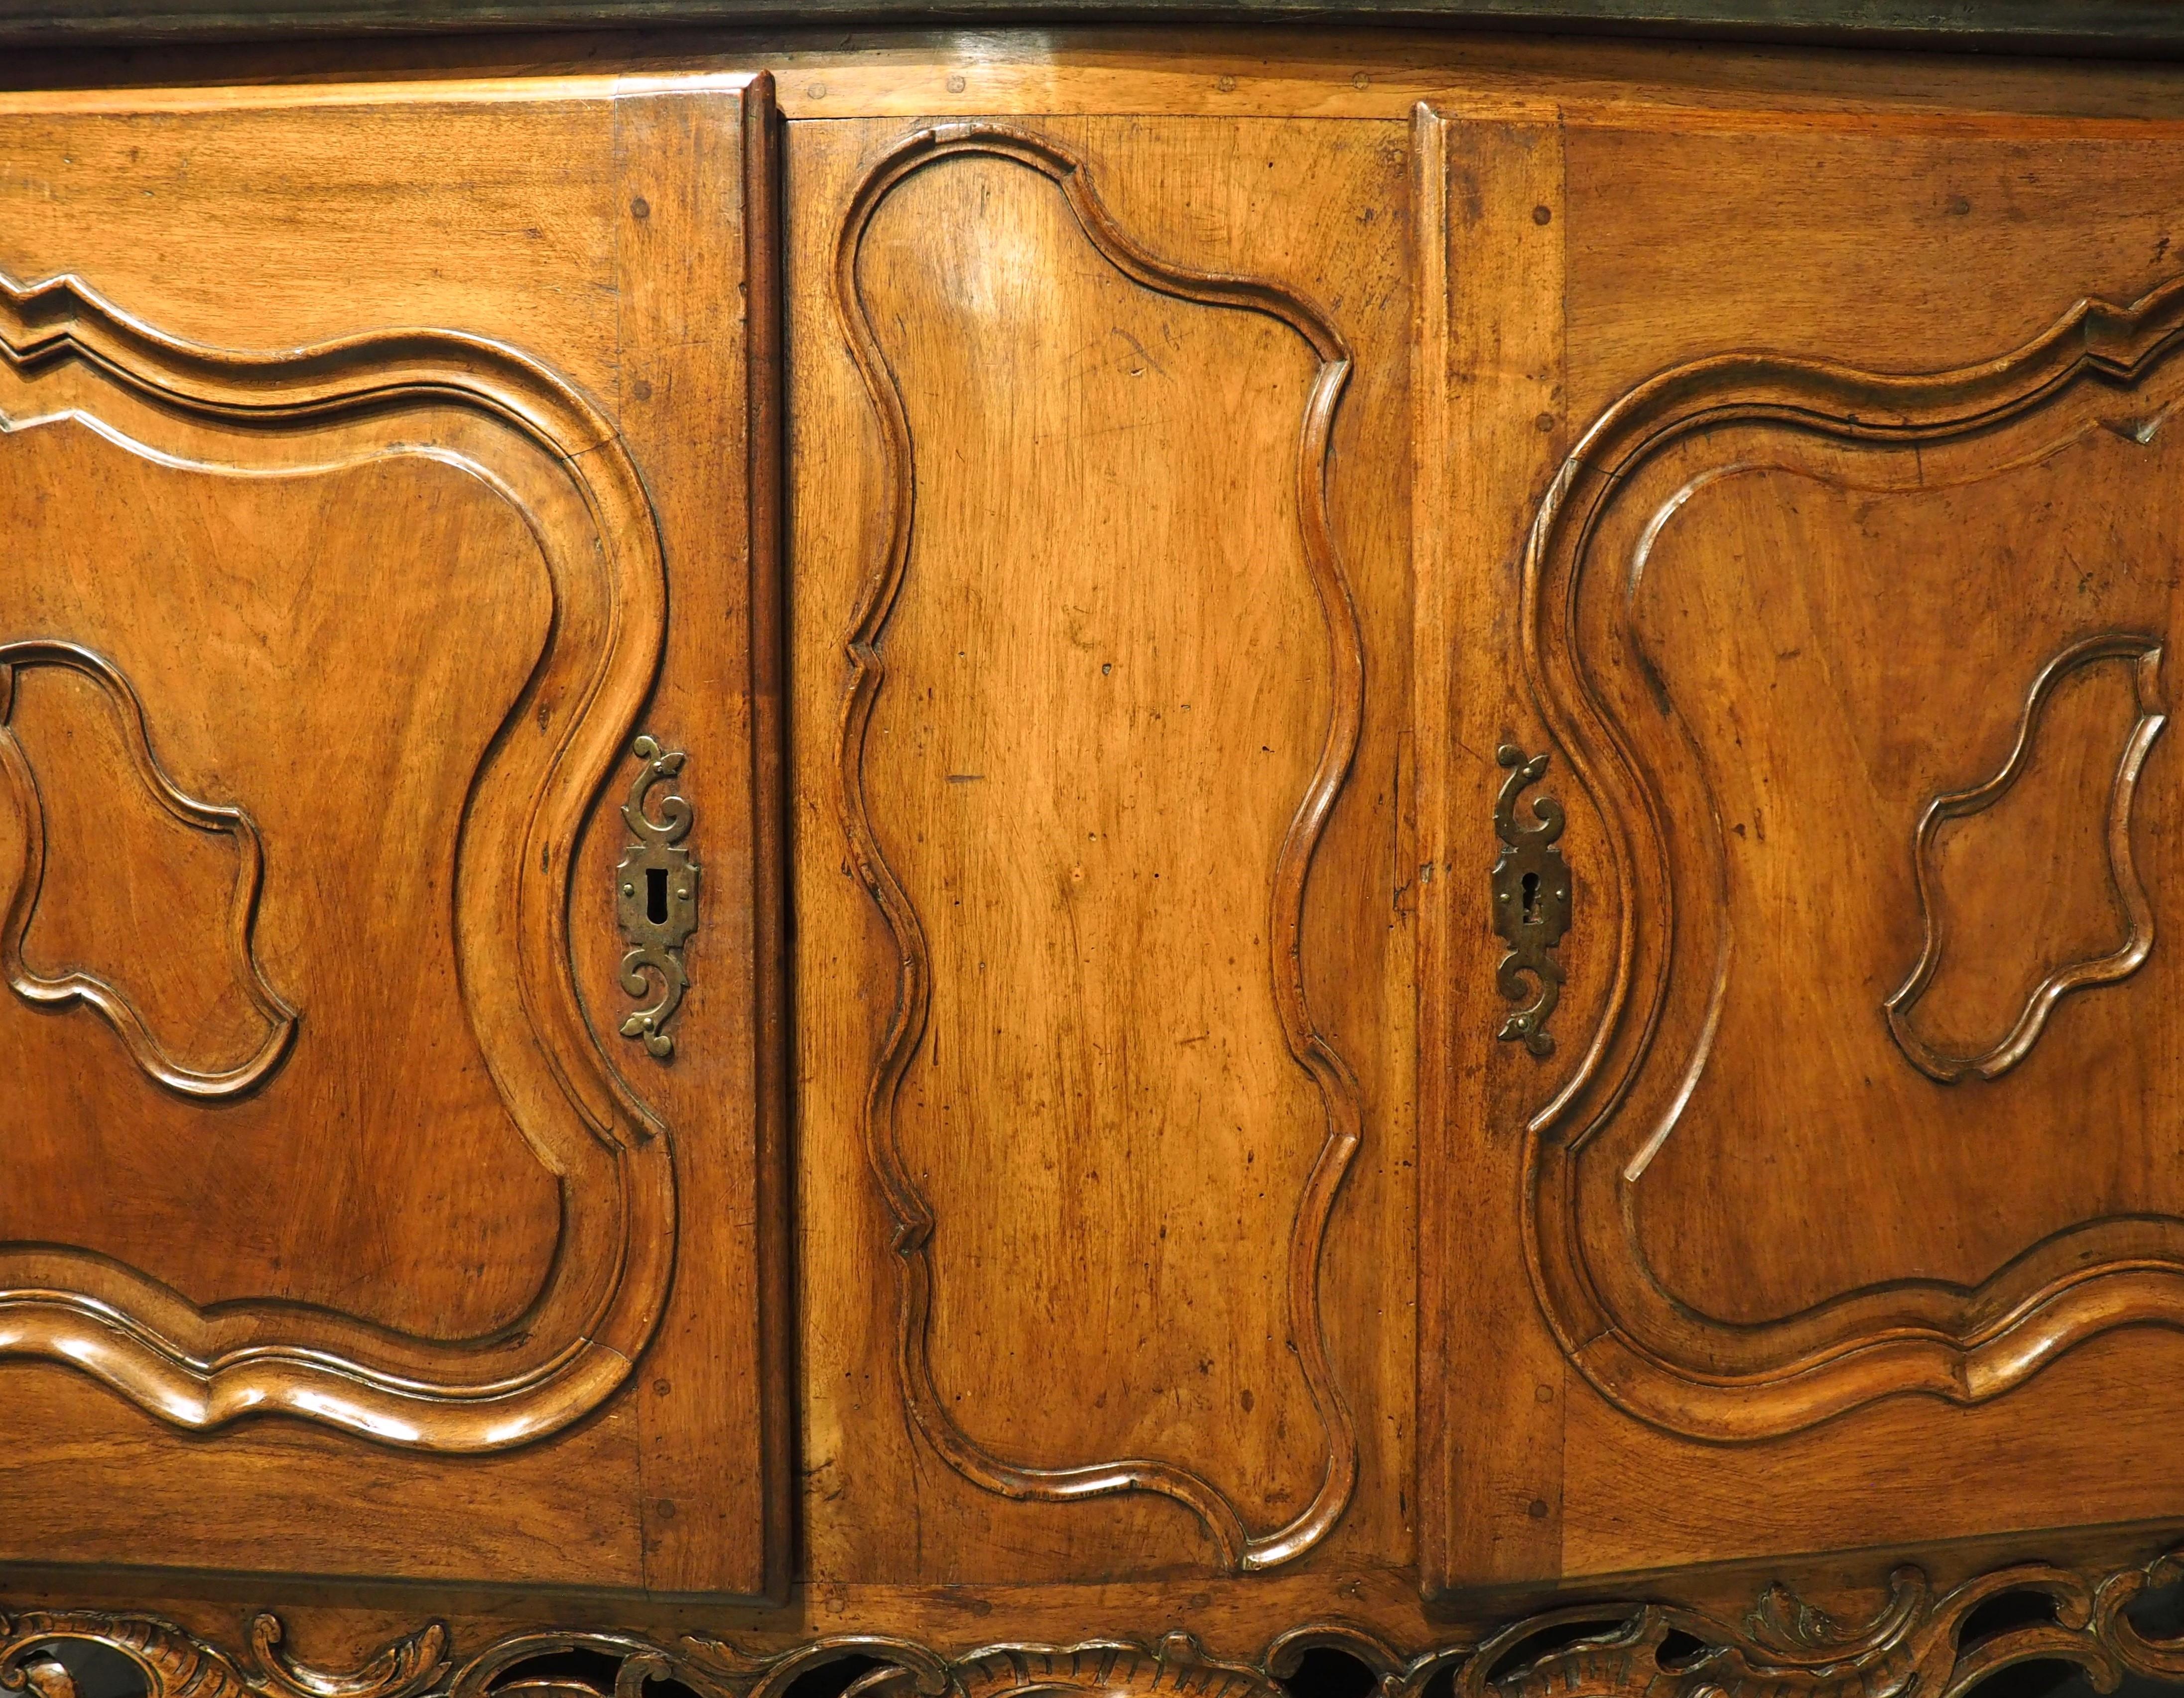 Hand-Carved Exceptional and Large Walnut Wood Buffet de Chateau, Nimes, France, C. 1750 For Sale